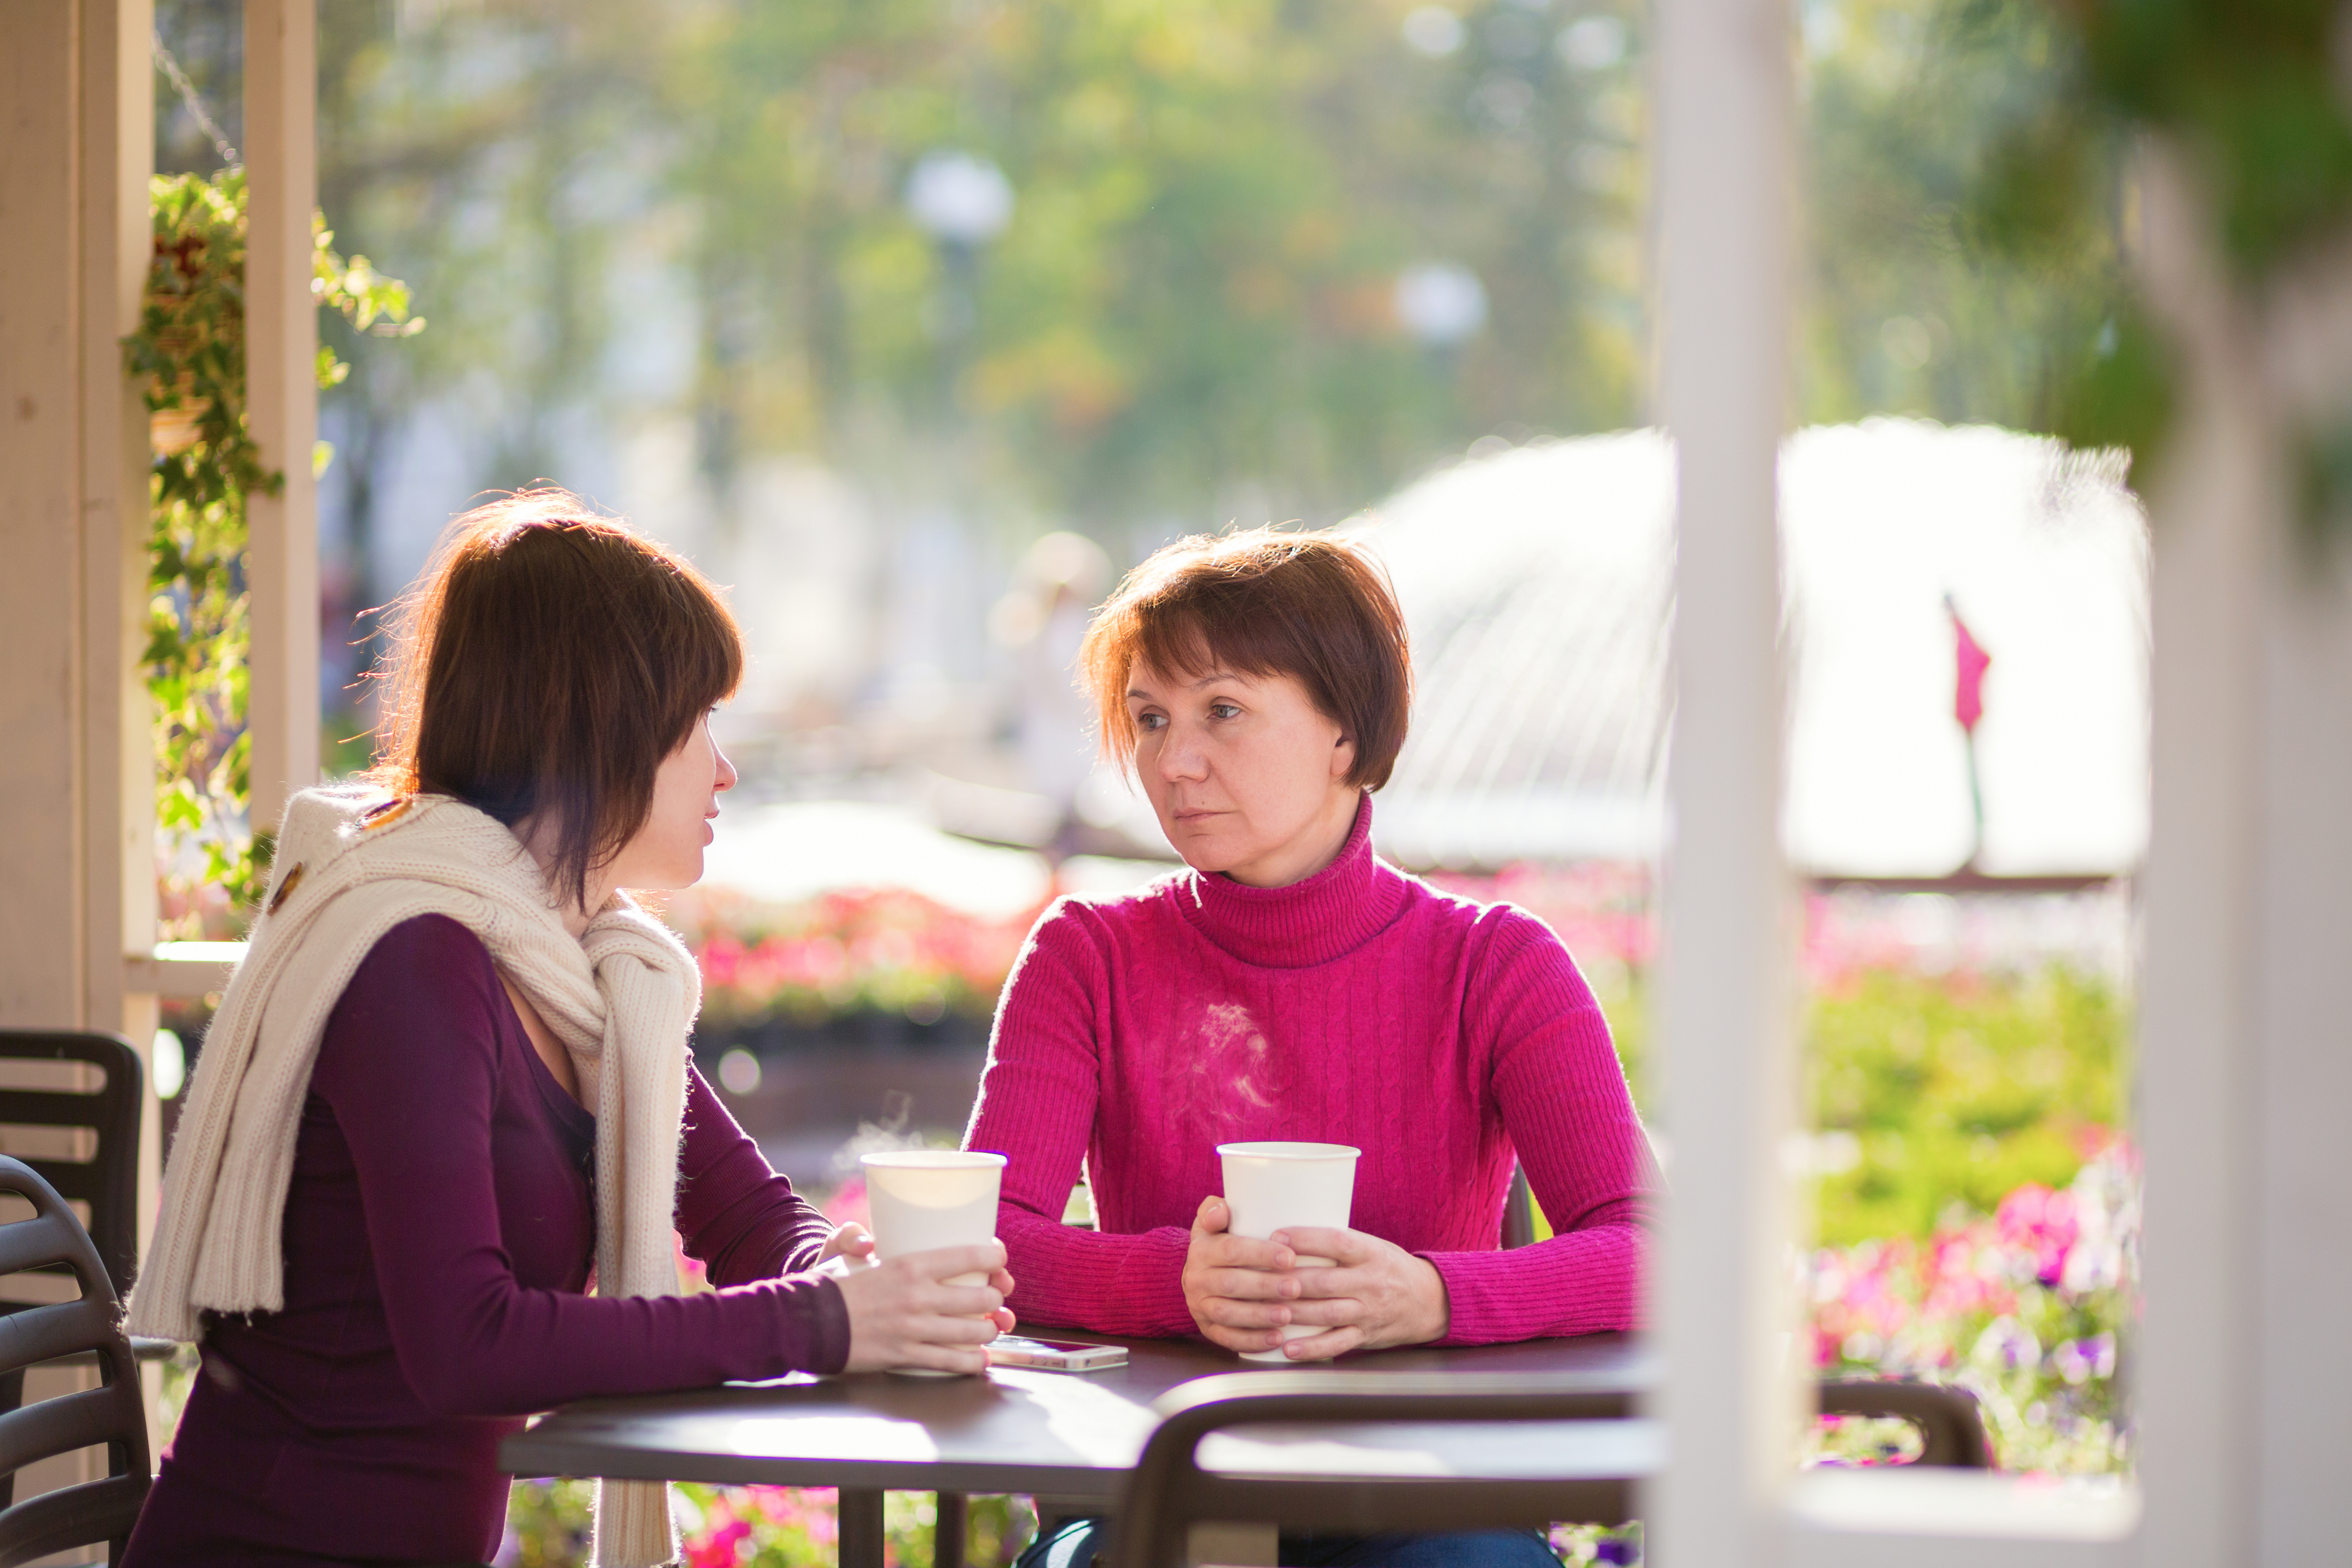 A young woman and an older woman are sitting in a cafe | Source: Shutterstock